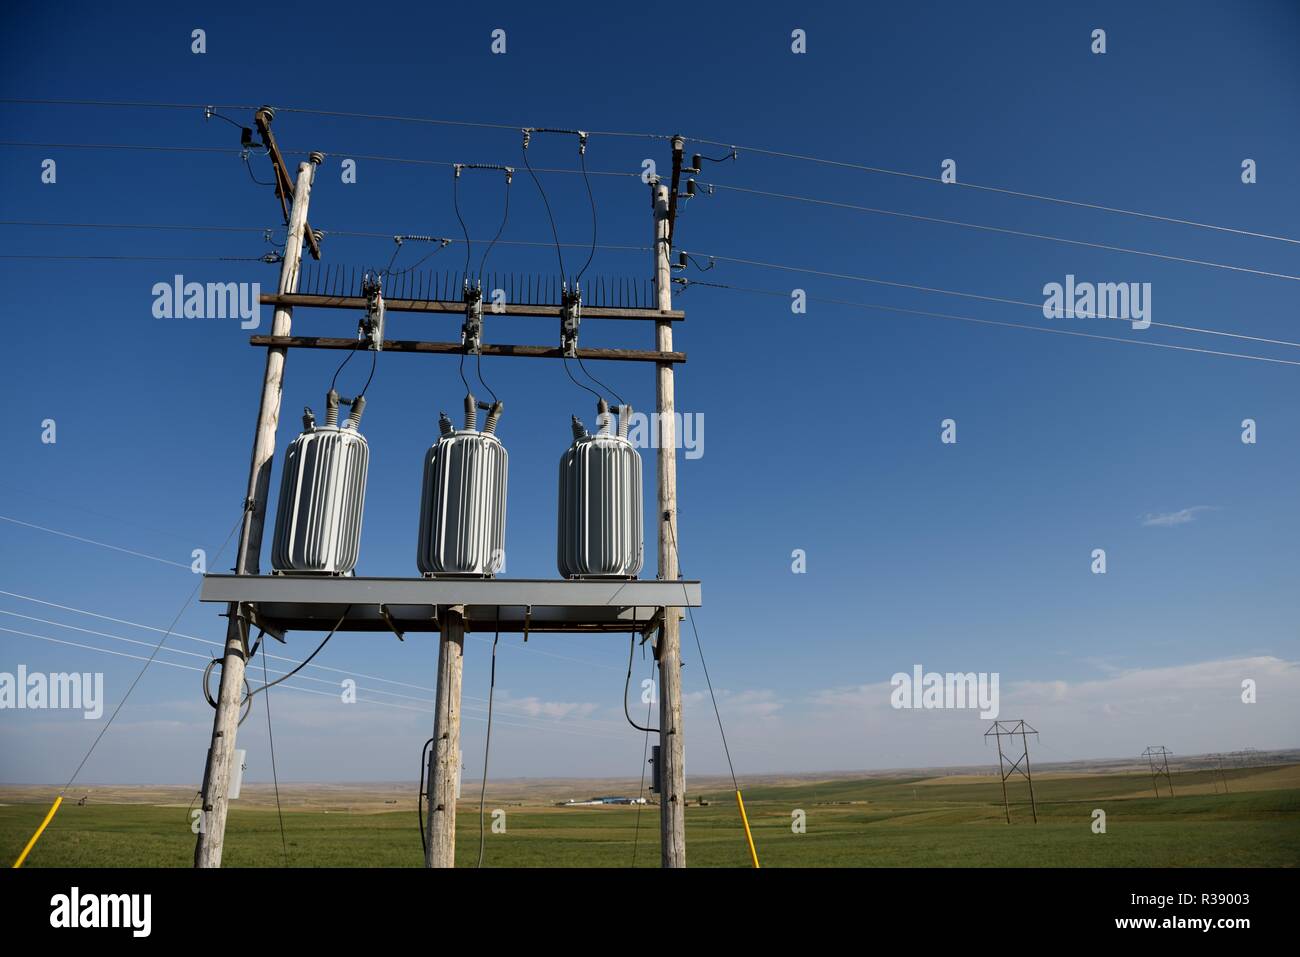 Electrical grid infrastructure, transformers, overhead high voltage power lines, against a blue sky in Wyoming, USA. Stock Photo